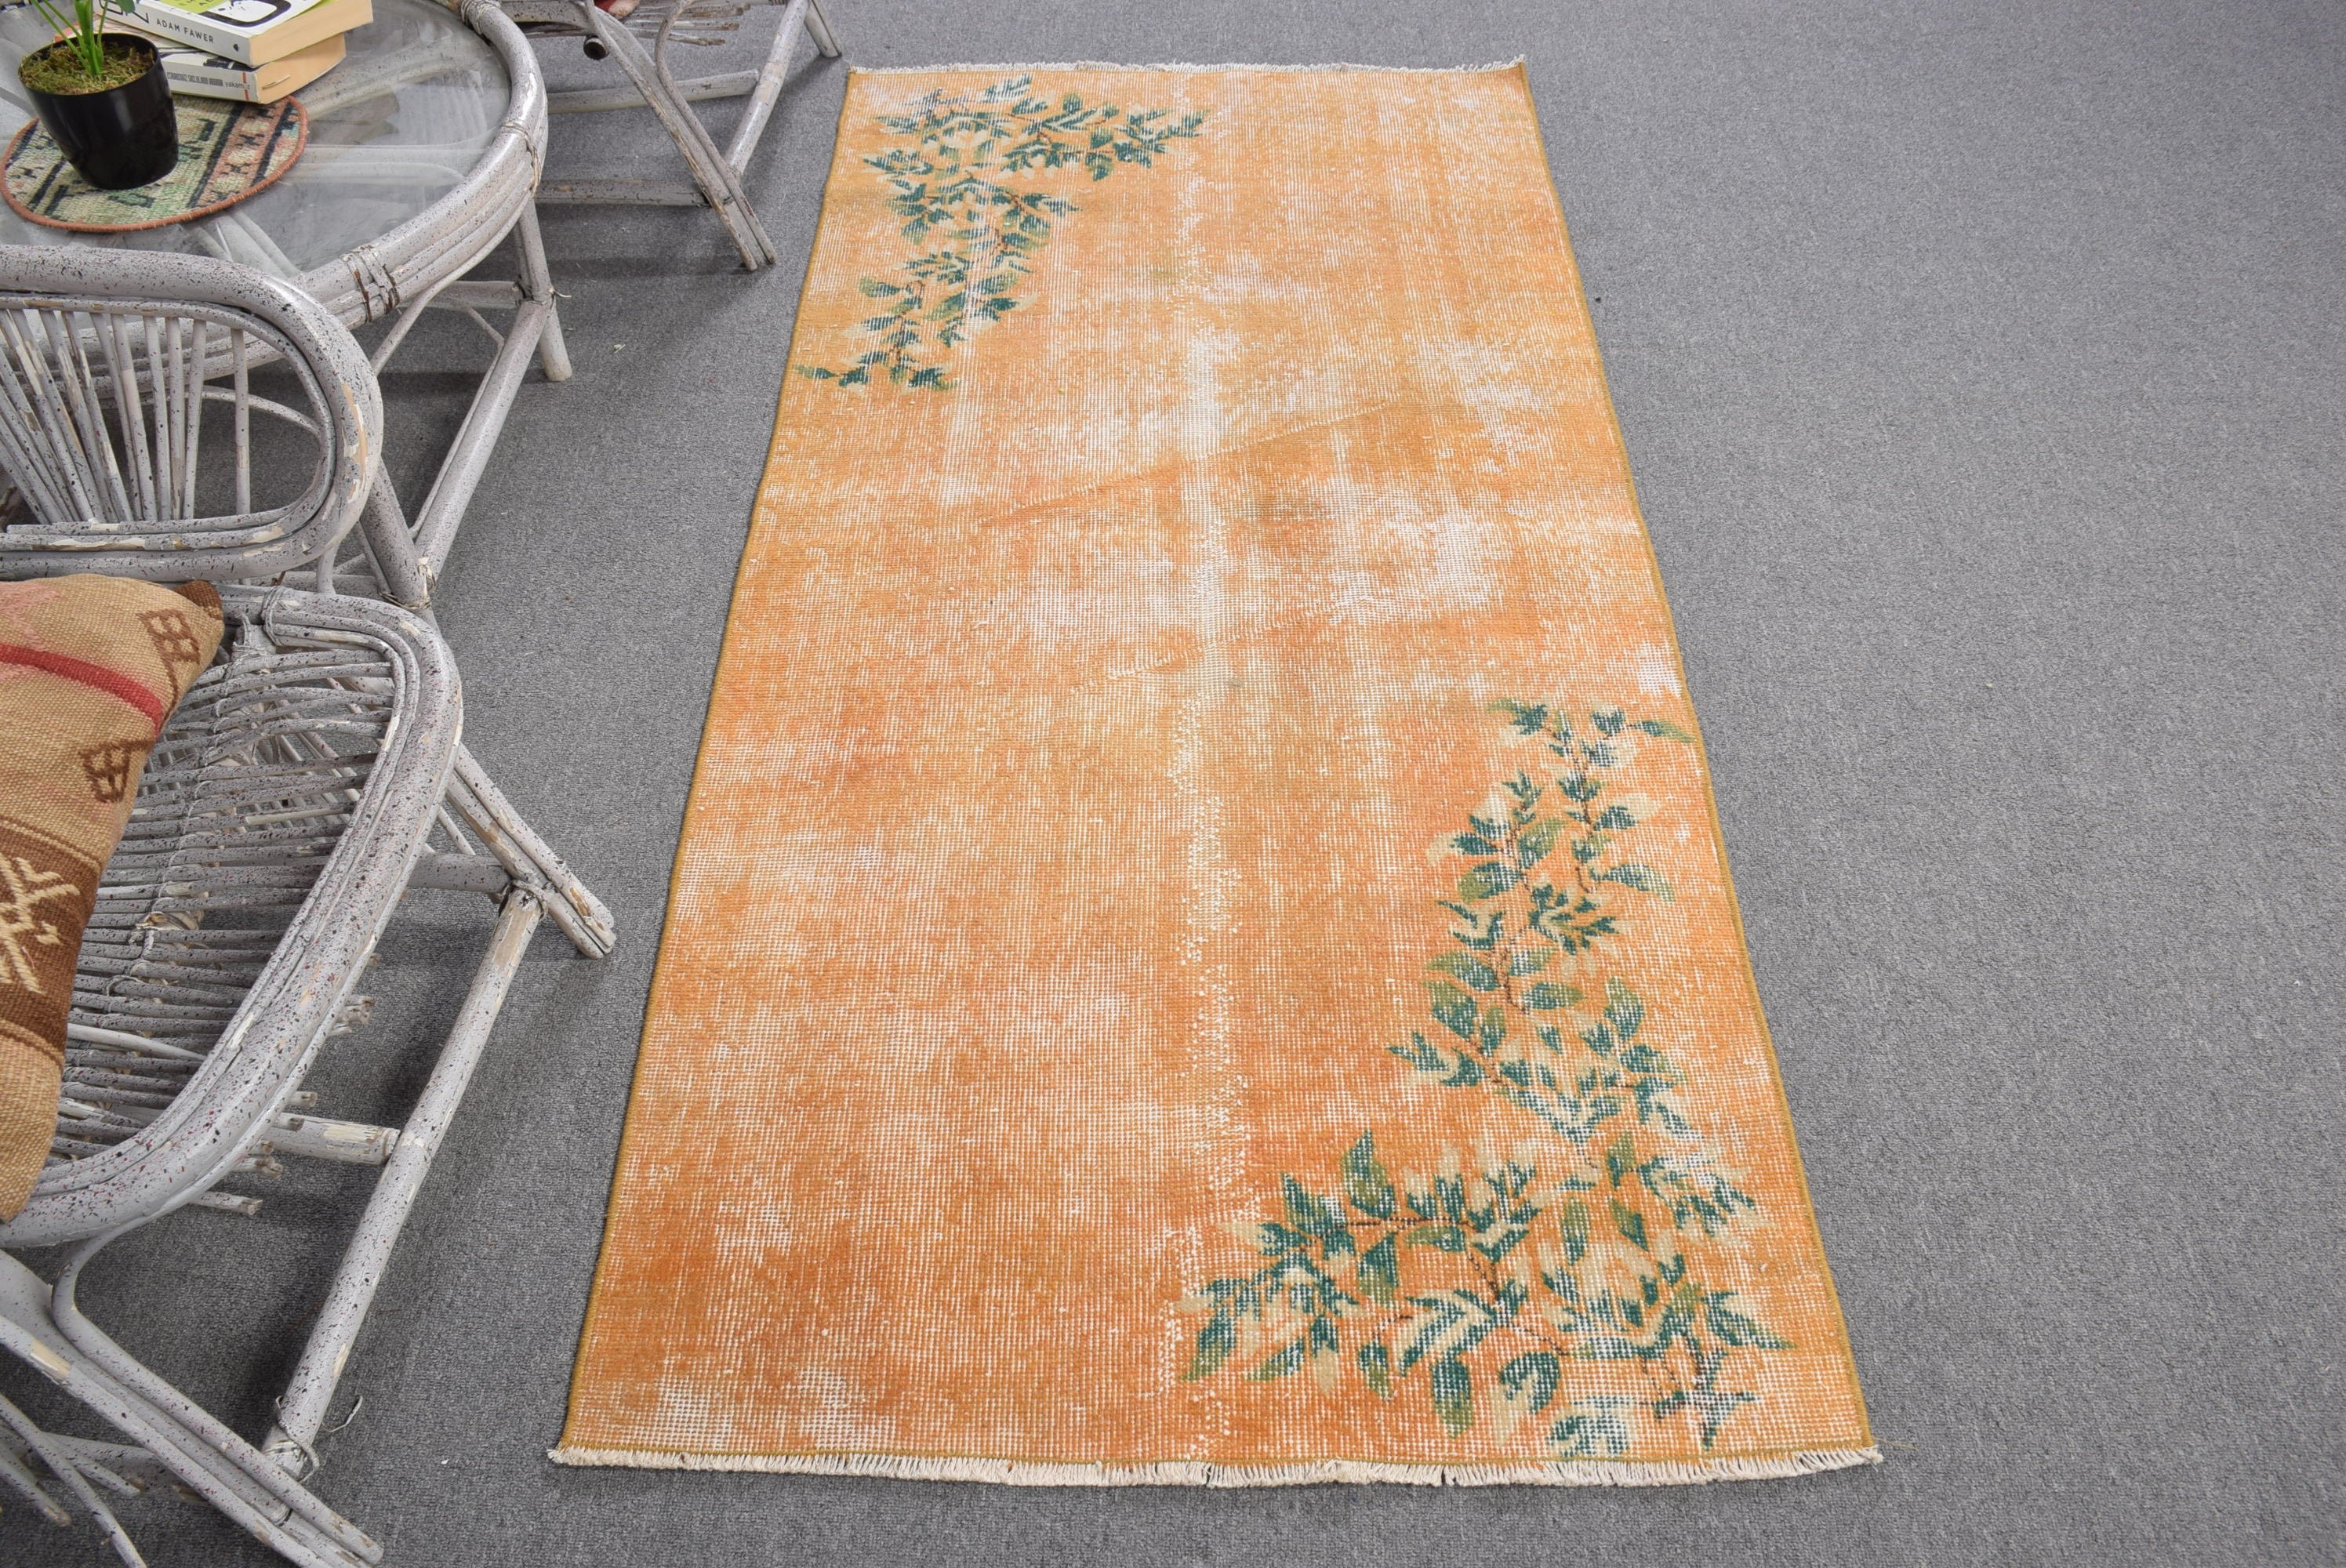 Turkish Rug, Kitchen Rug, Vintage Rug, Anatolian Rugs, 2.9x6.3 ft Accent Rug, Rugs for Entry, Wool Rugs, Entry Rug, Orange Floor Rug